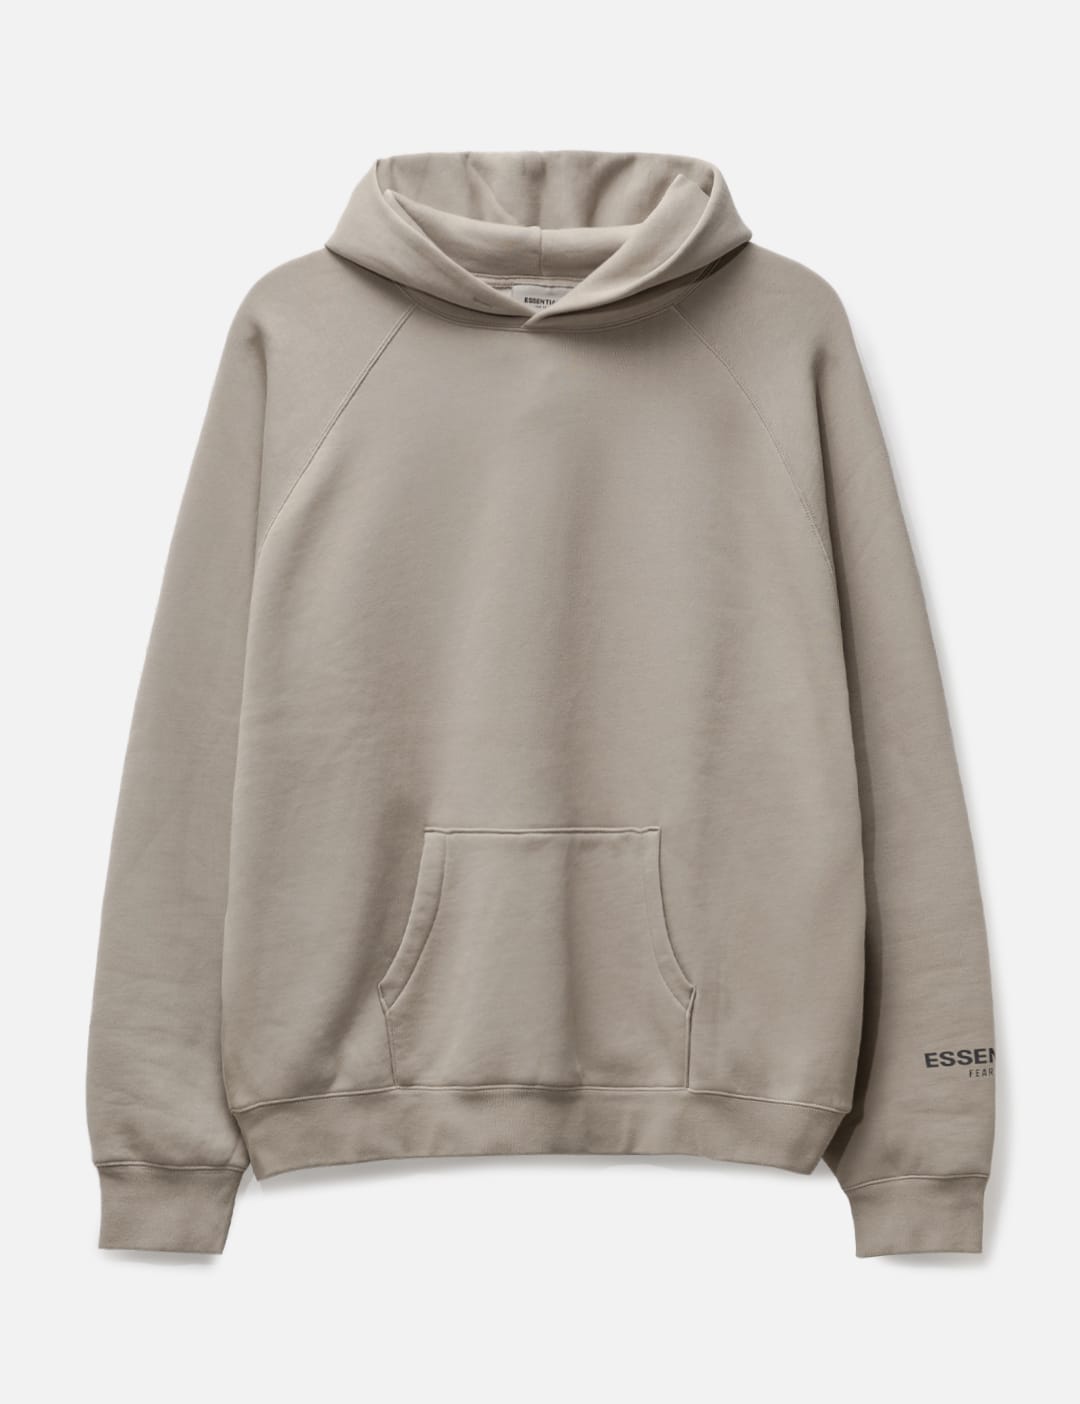 Verdy - VERDY DOVER STREET MARKET HOODIE | HBX - Globally Curated